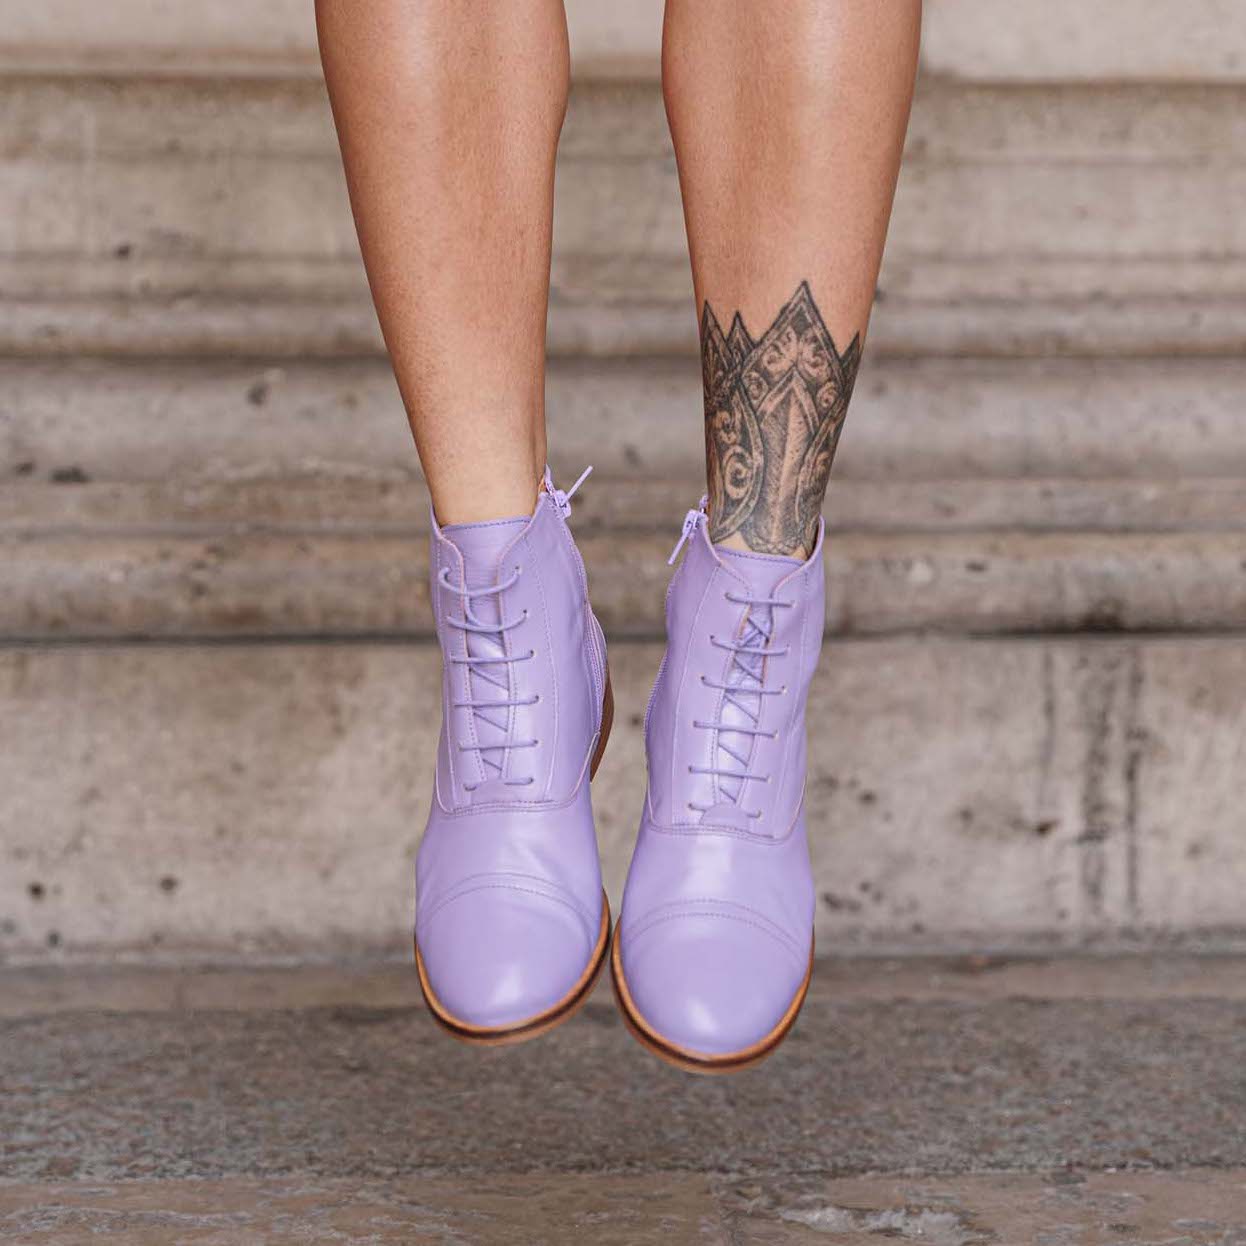 Chaussures Swing Bottines Lilas Cuir 3